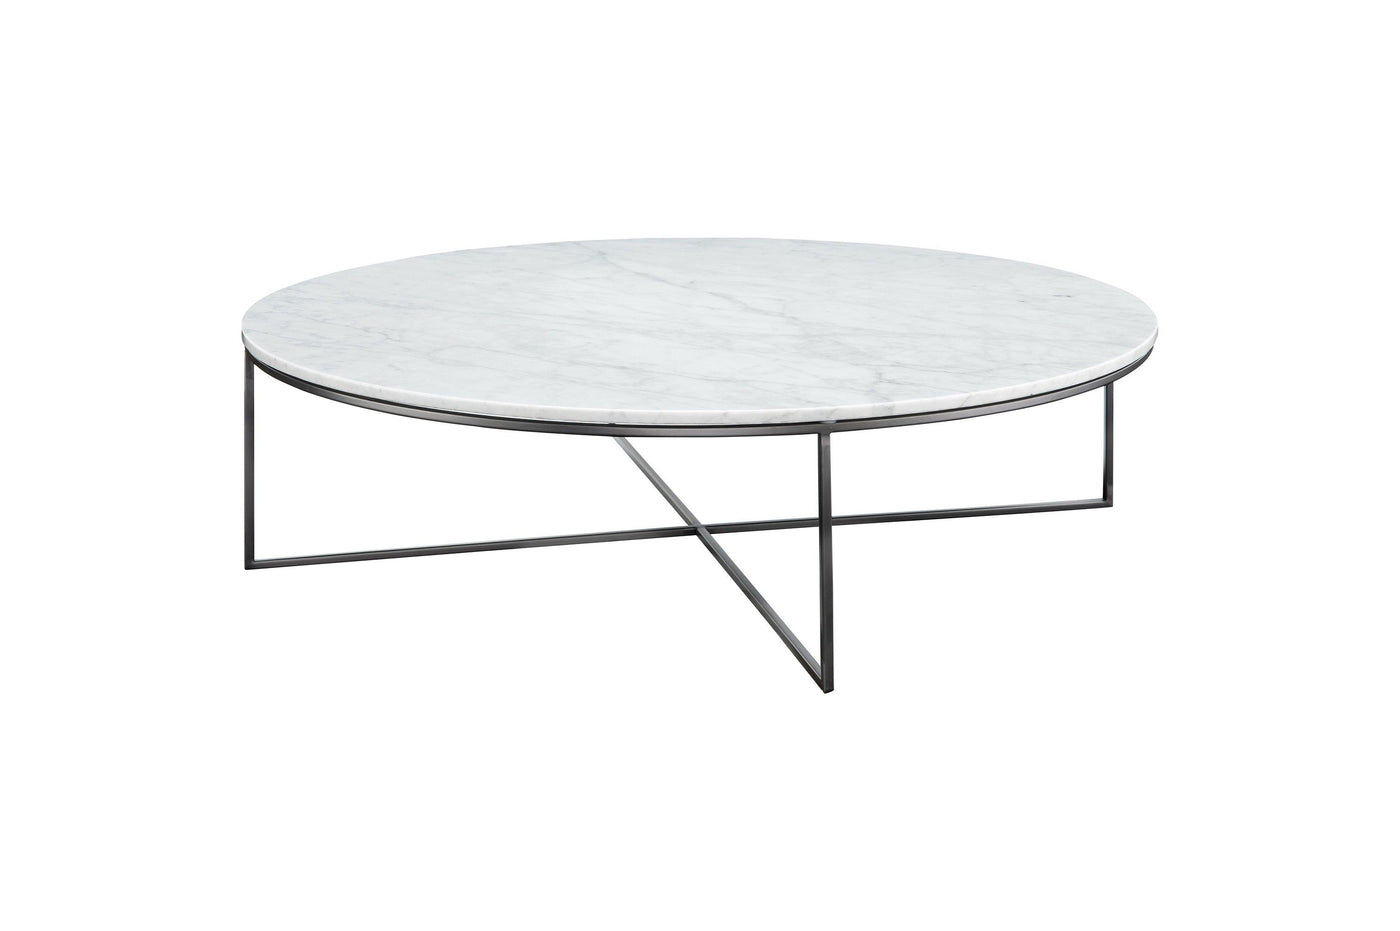 Kenny round marble coffee table Hoya Casa Hoyacasa.ca couch sofa bed 4 seater sectional table kitchen table love seat sofa bed matress Toronto Canada manufactures home decoration frames indoor Ottoman sale